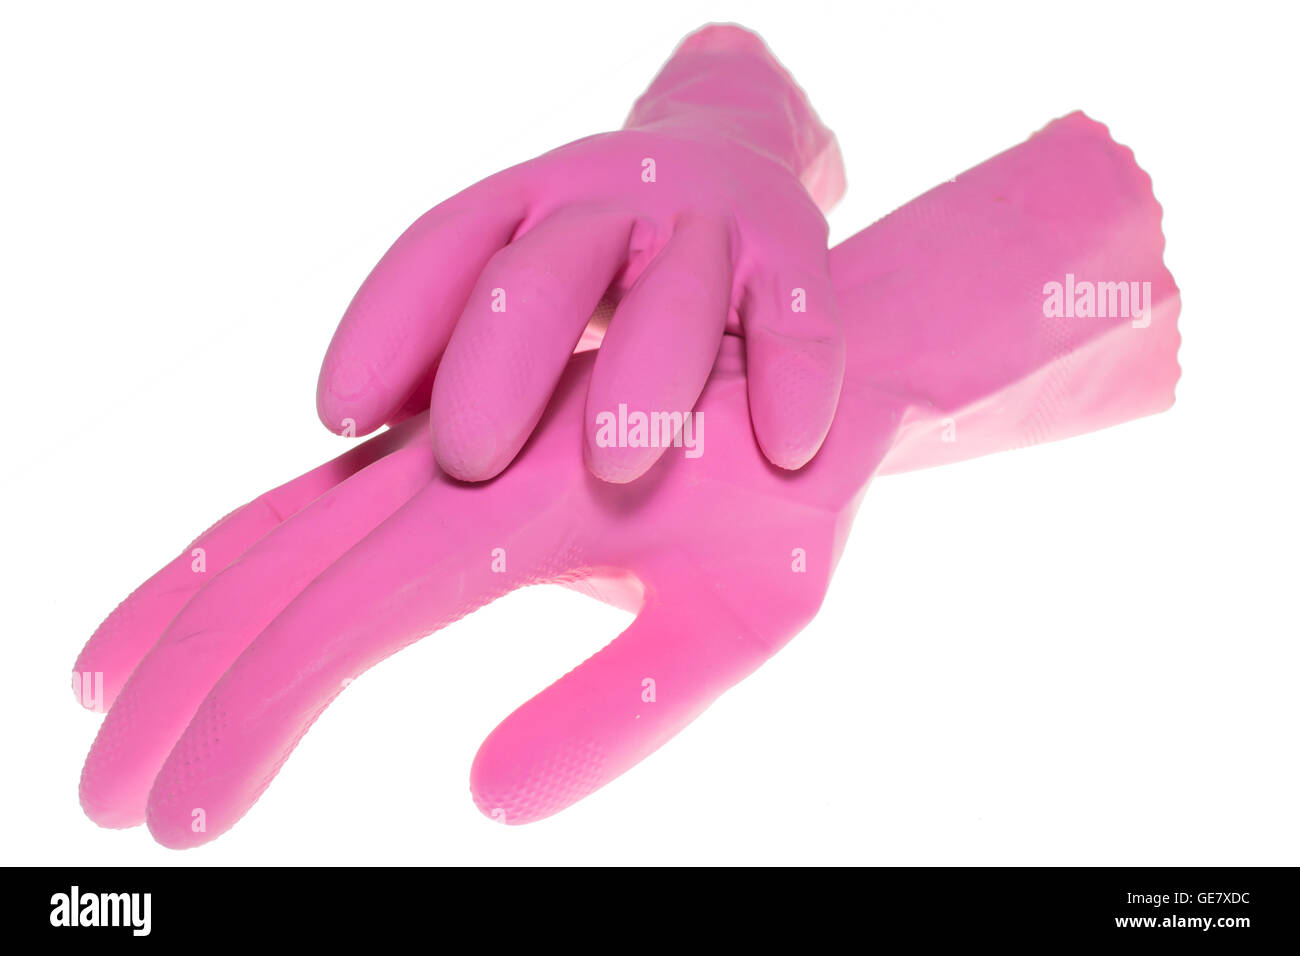 pink rubber gloves on white background Stock Photo